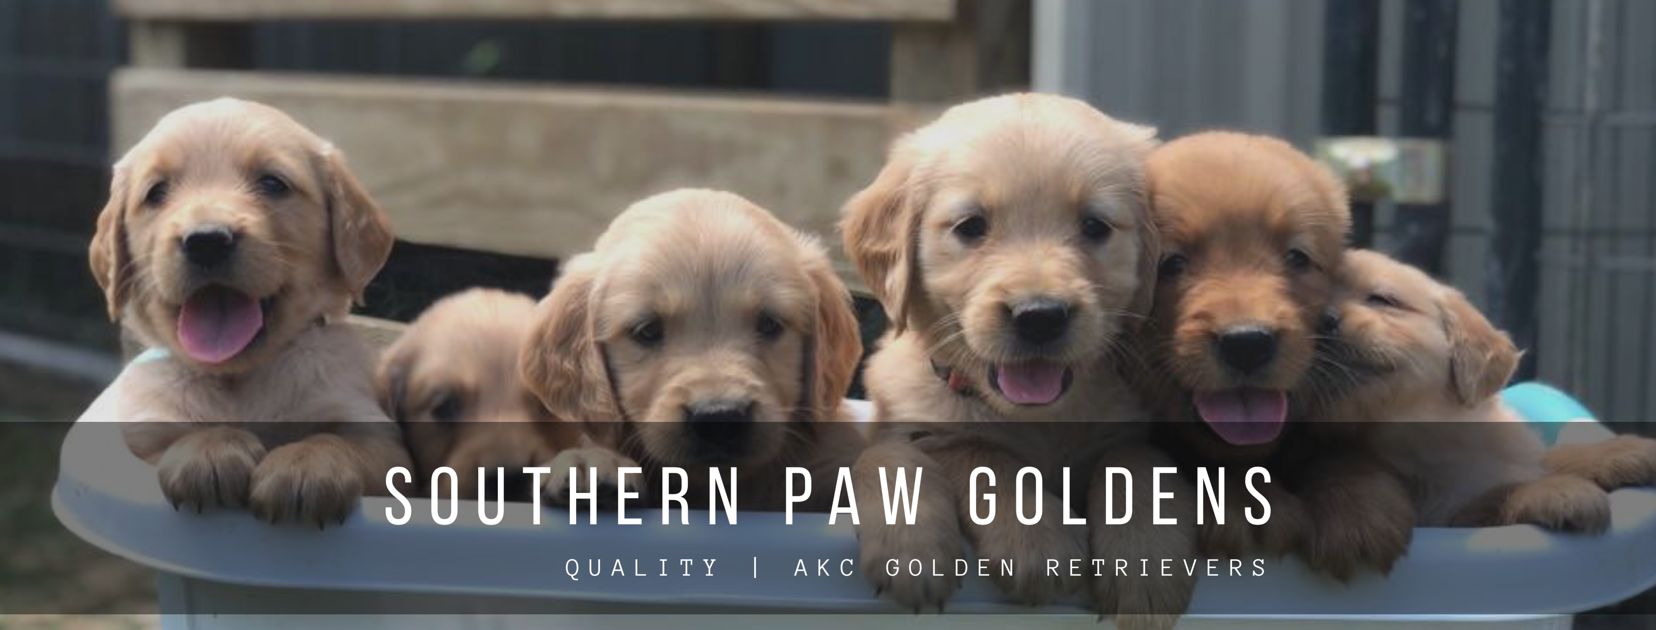 Southern Paw Goldens